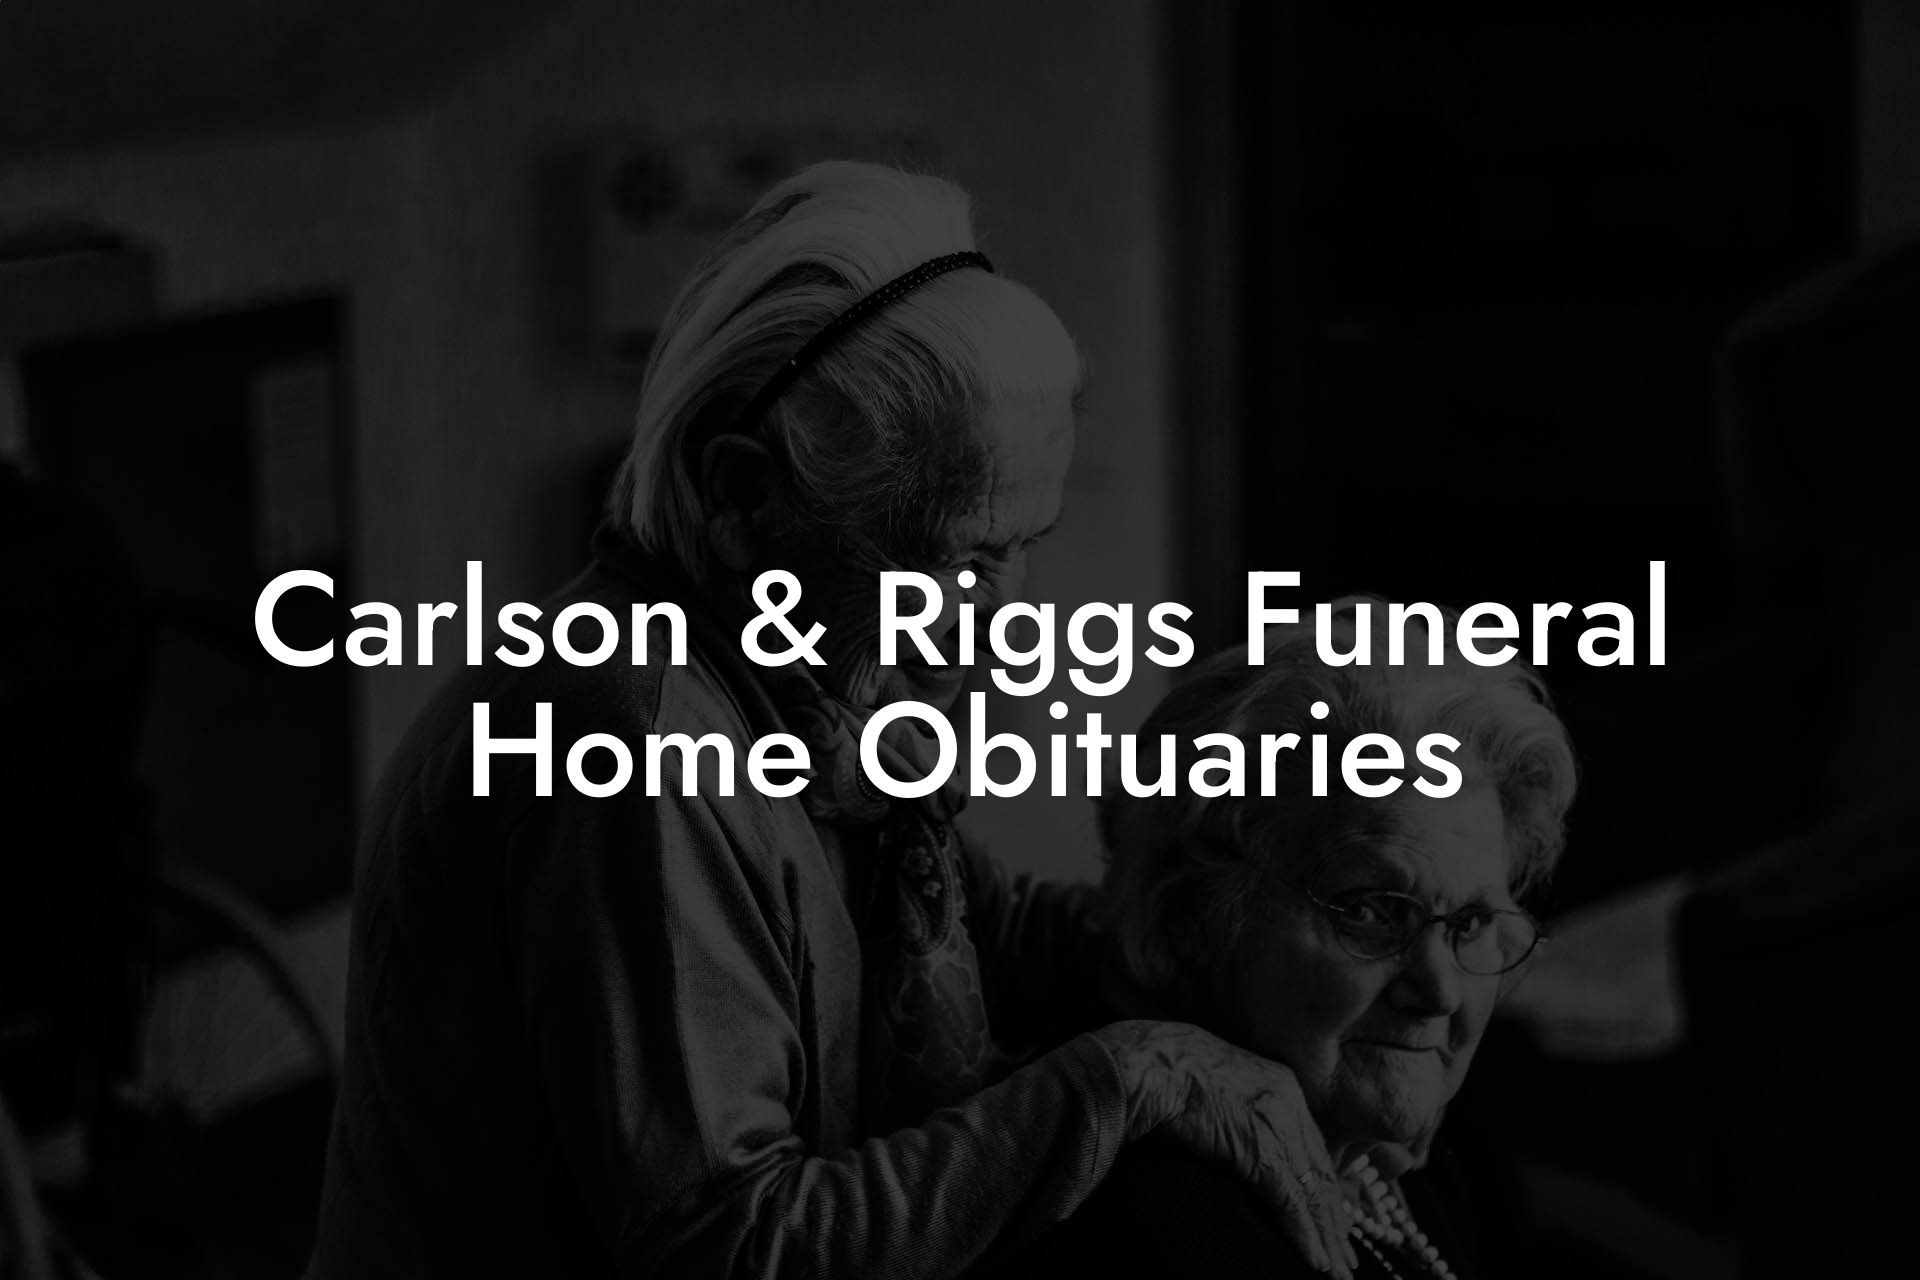 Carlson & Riggs Funeral Home Obituaries